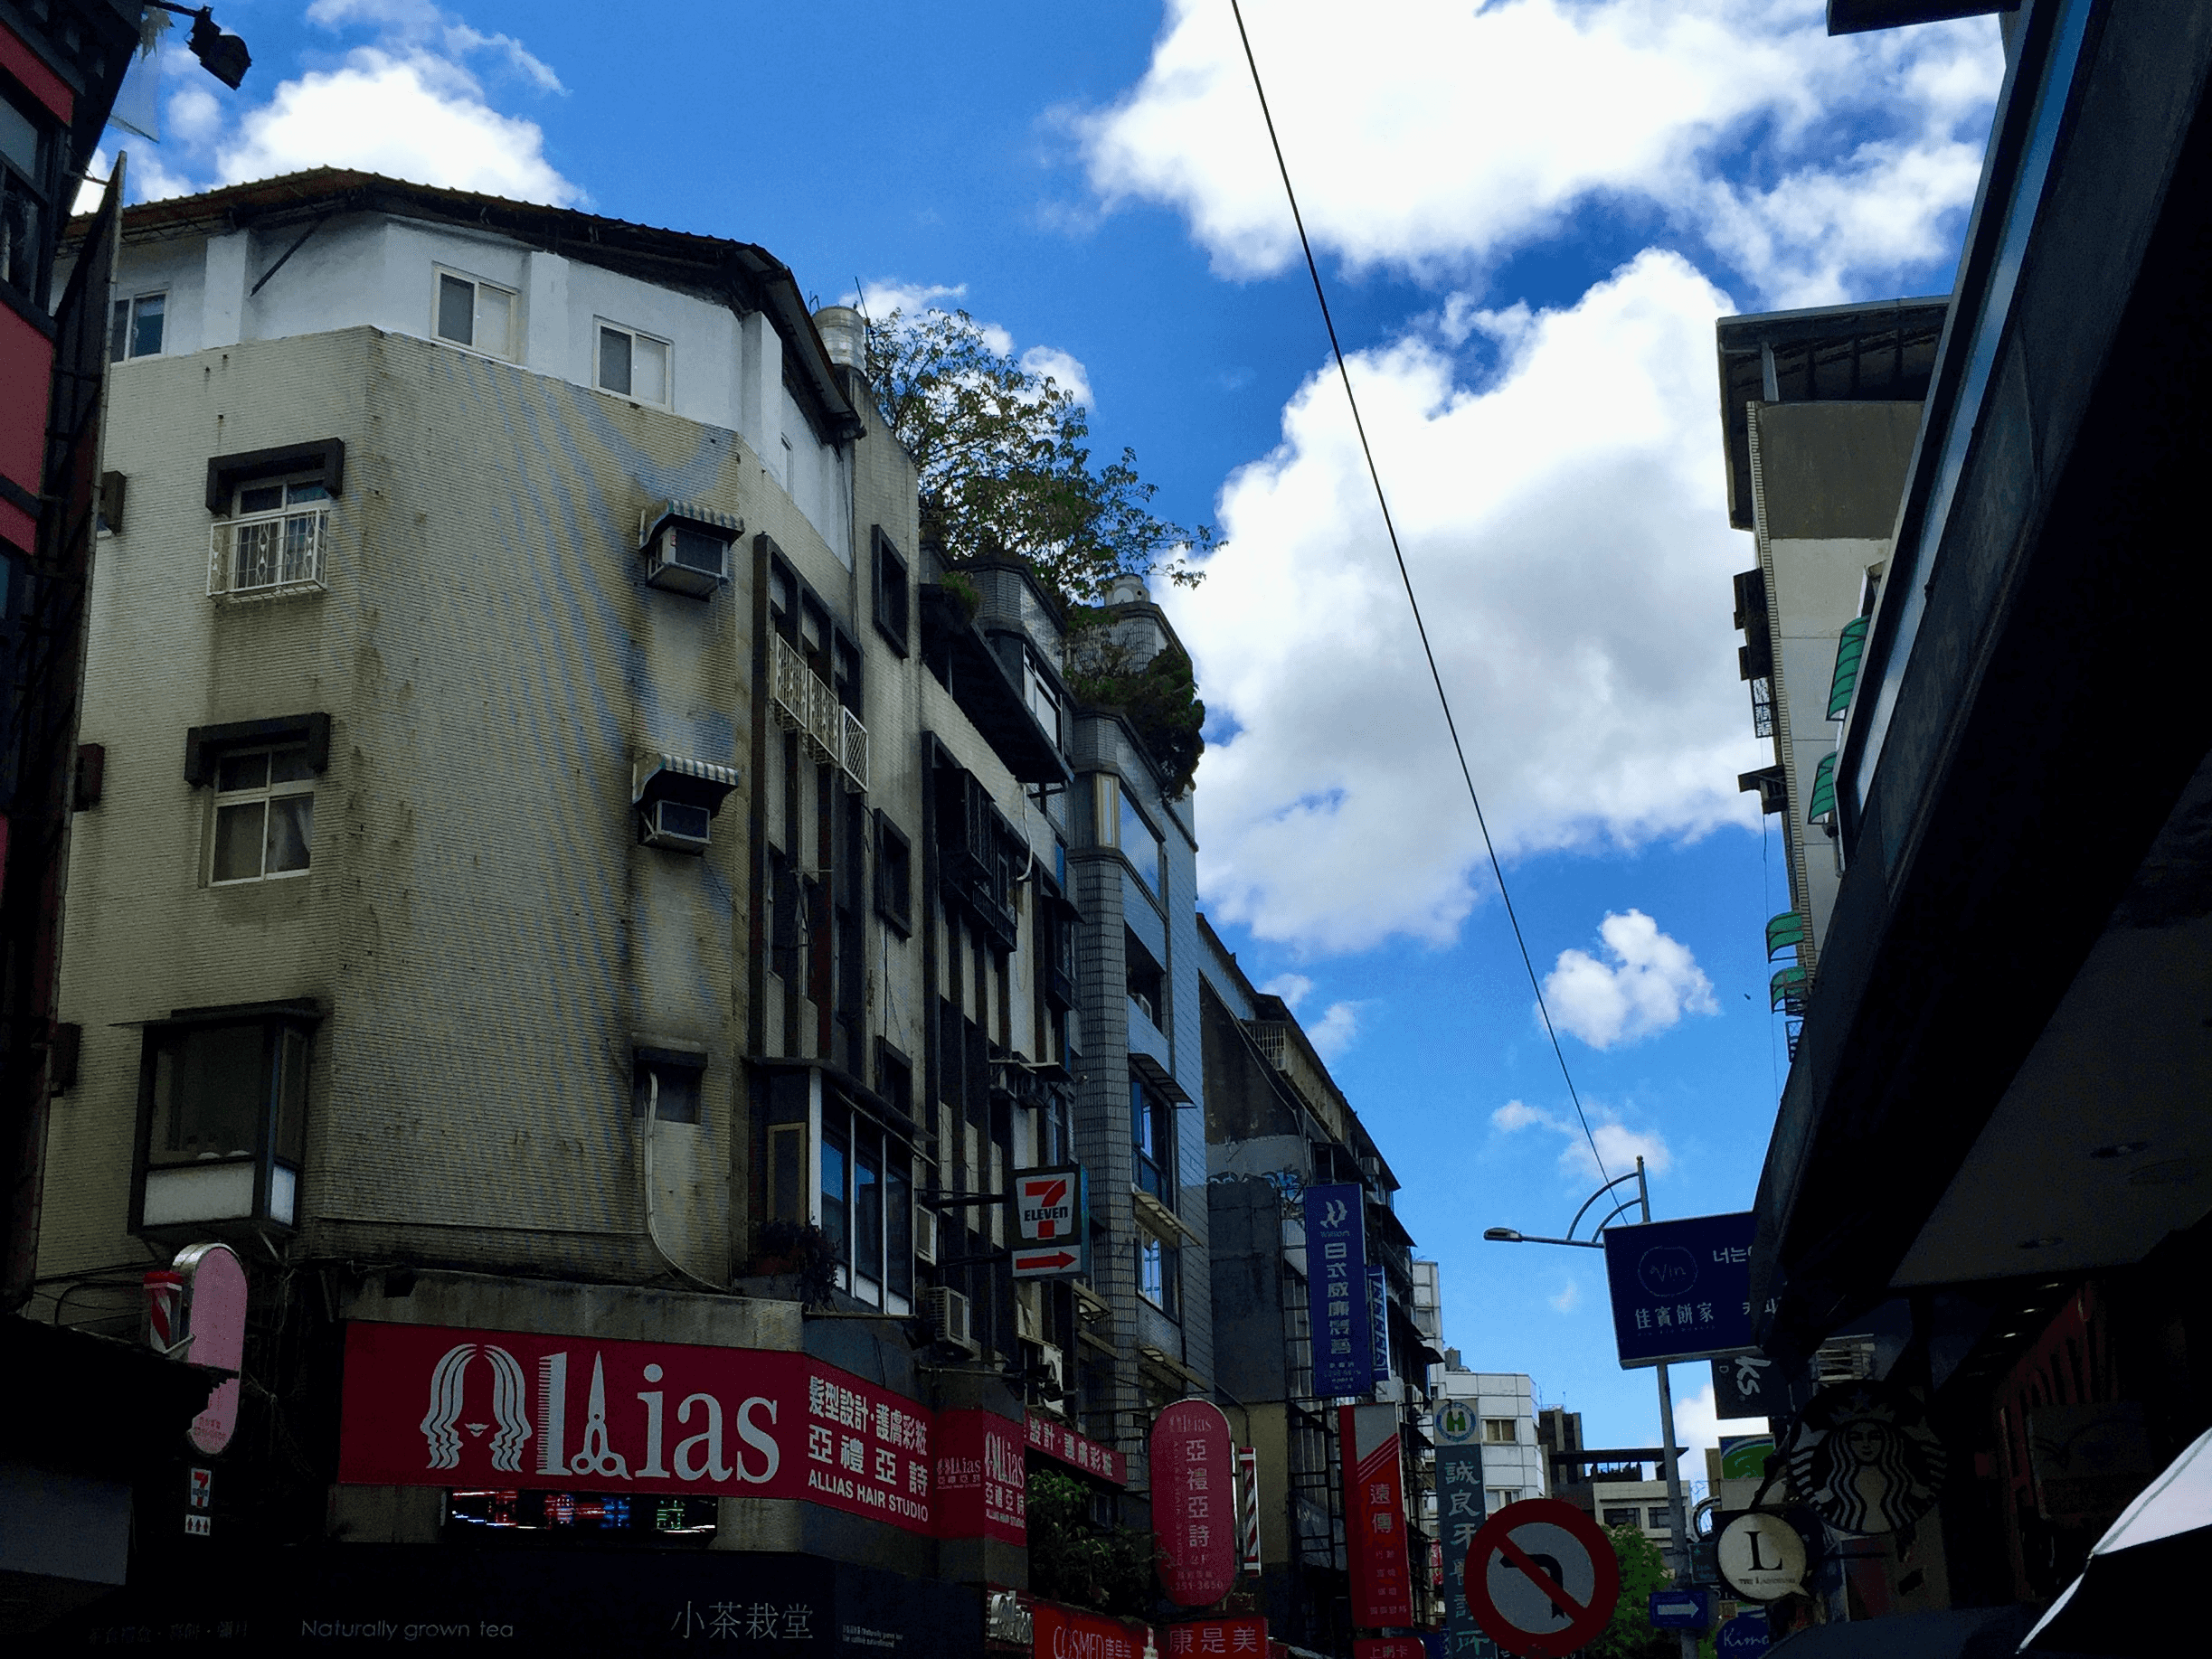 Stores and houses in Daan District in Taipei